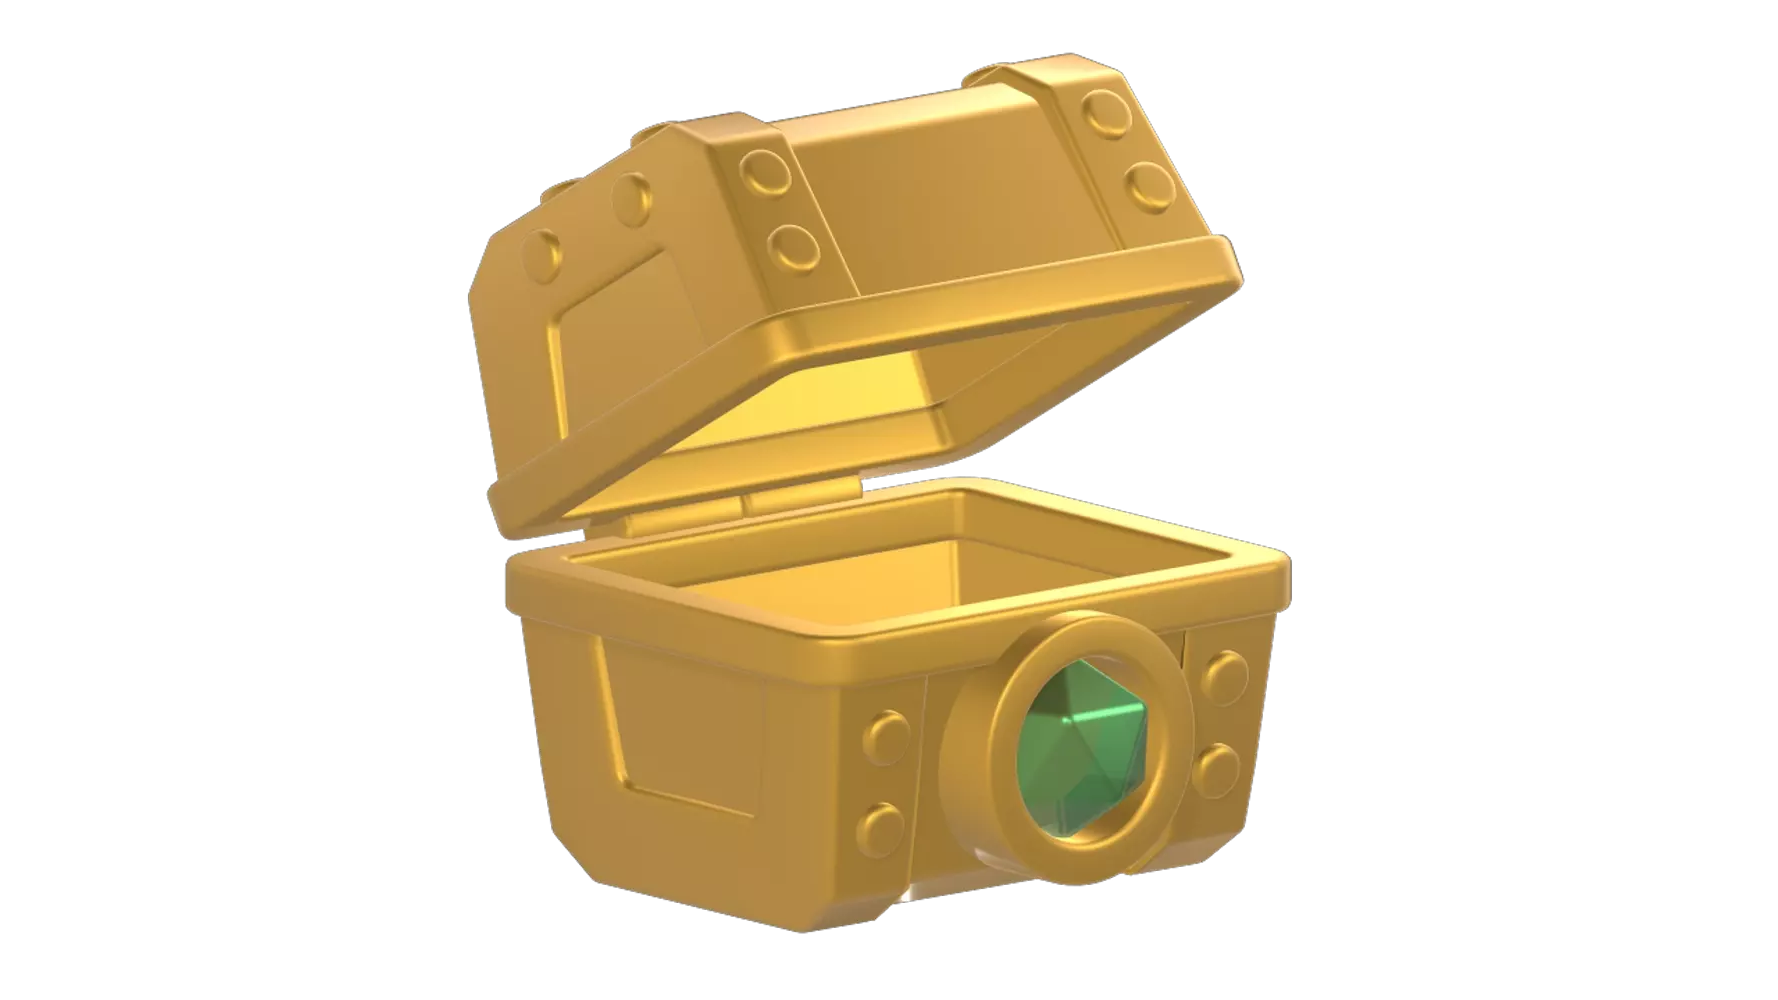 Gold Box 3D Graphic